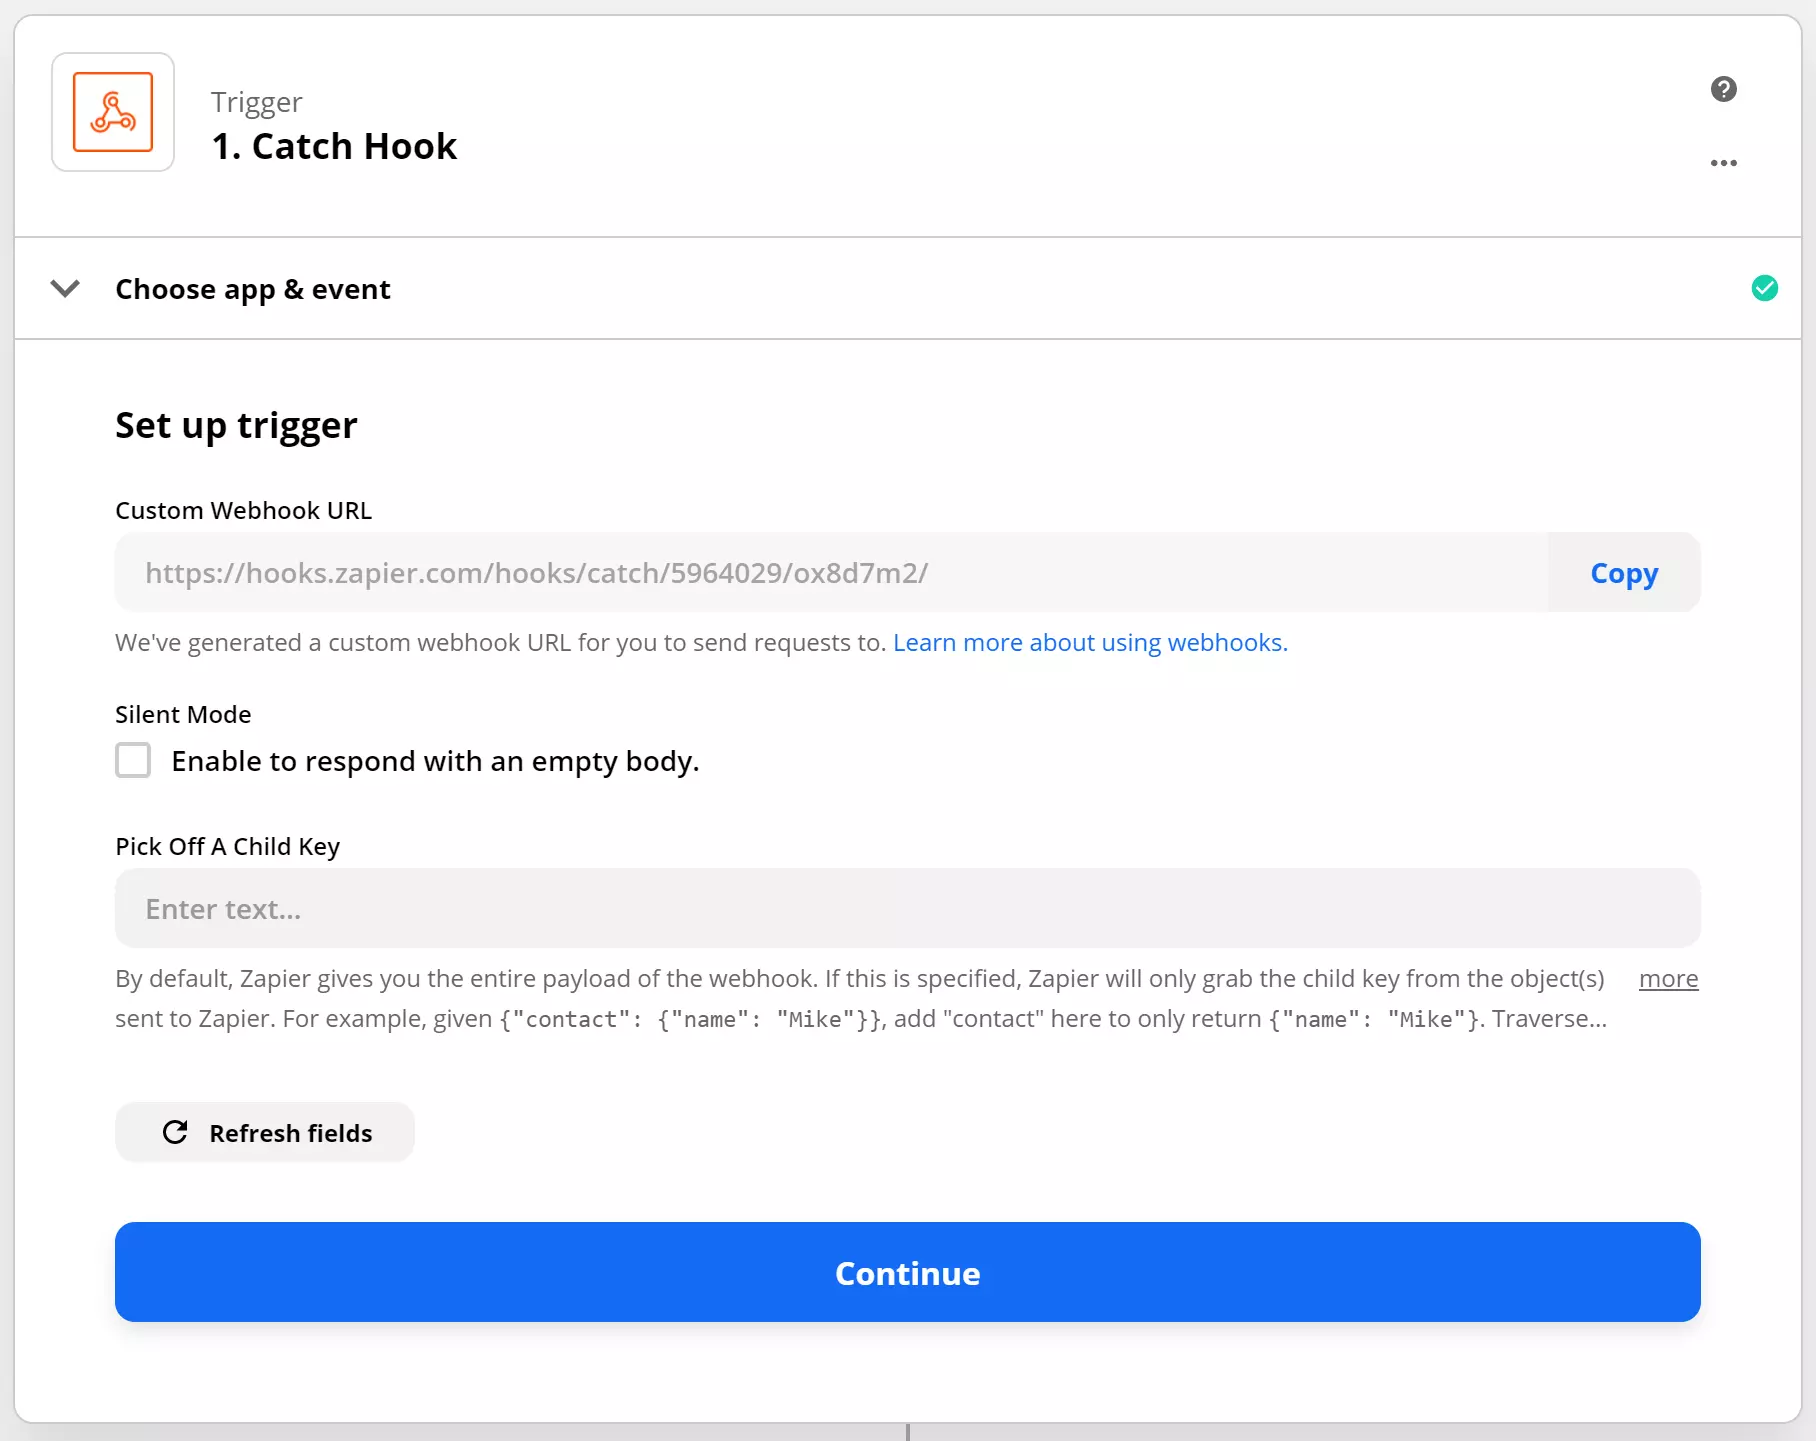 Copy the webhook URL from the Catch Hook event in Zapier